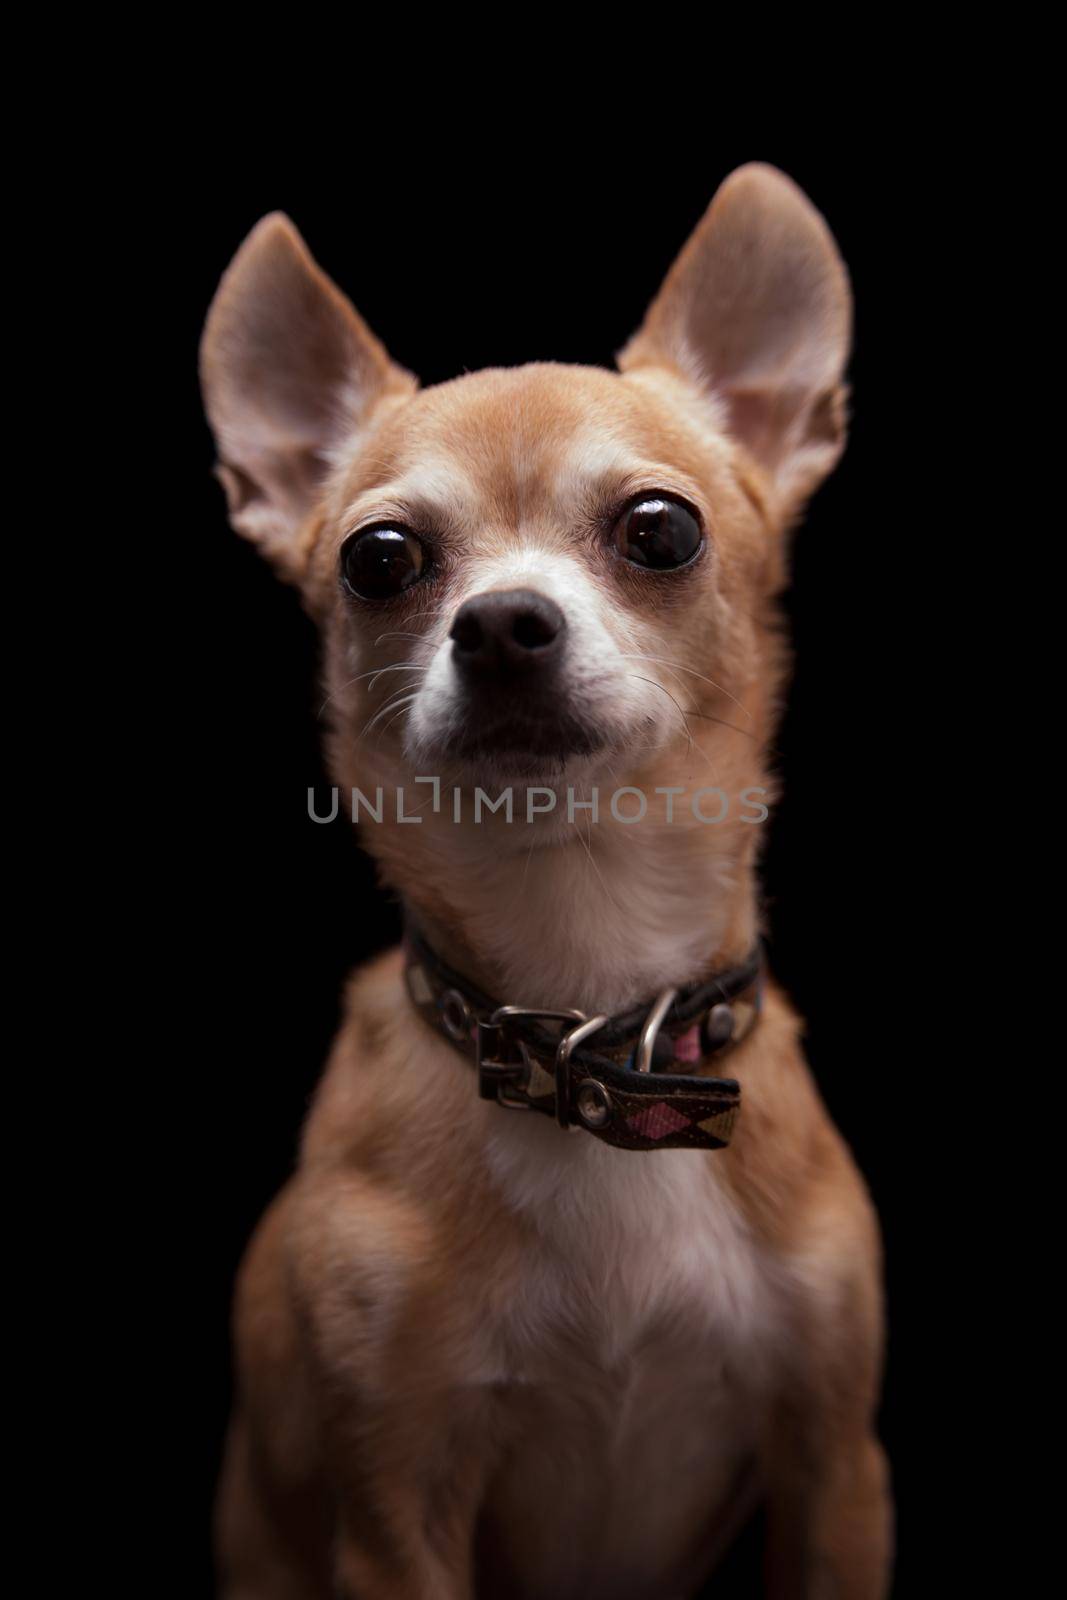 Chihuahua, 11 years old, isolated on the black background